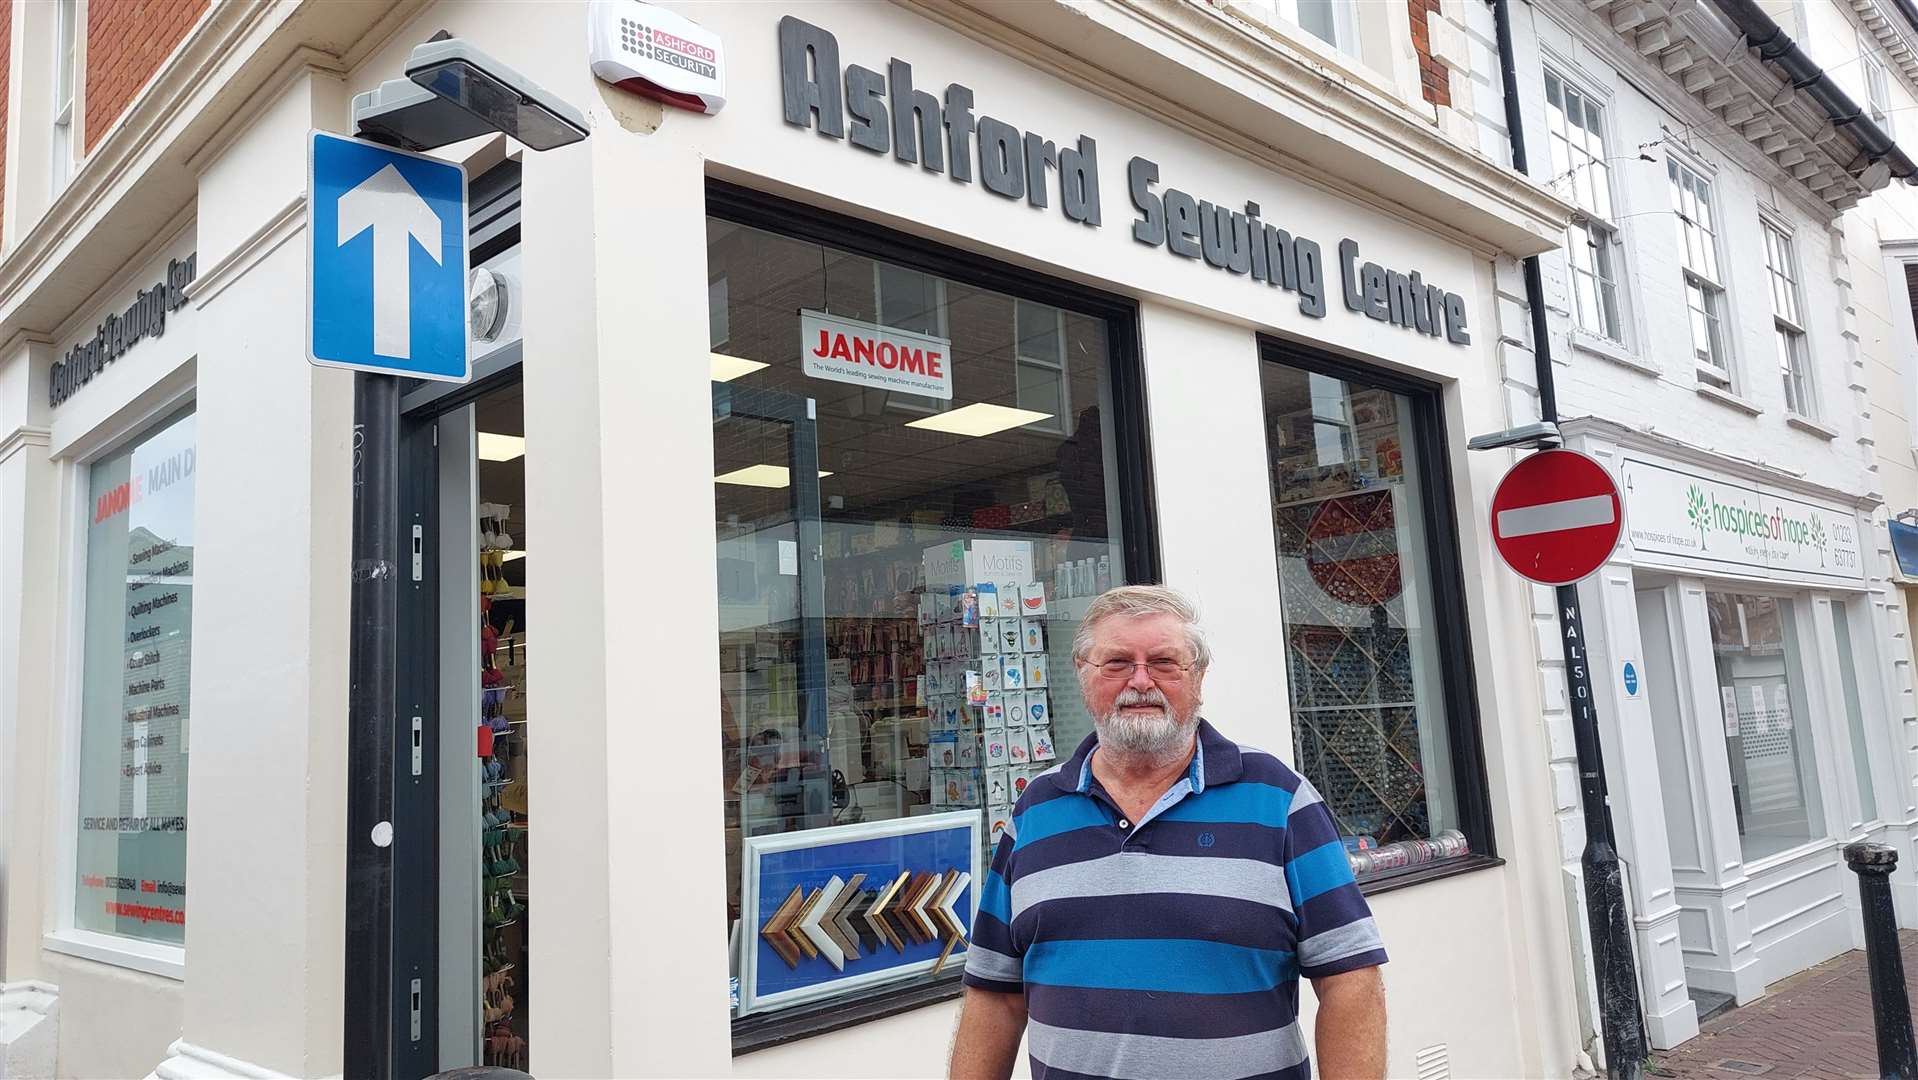 Jim Symes, founder of Ashford Sewing Centre